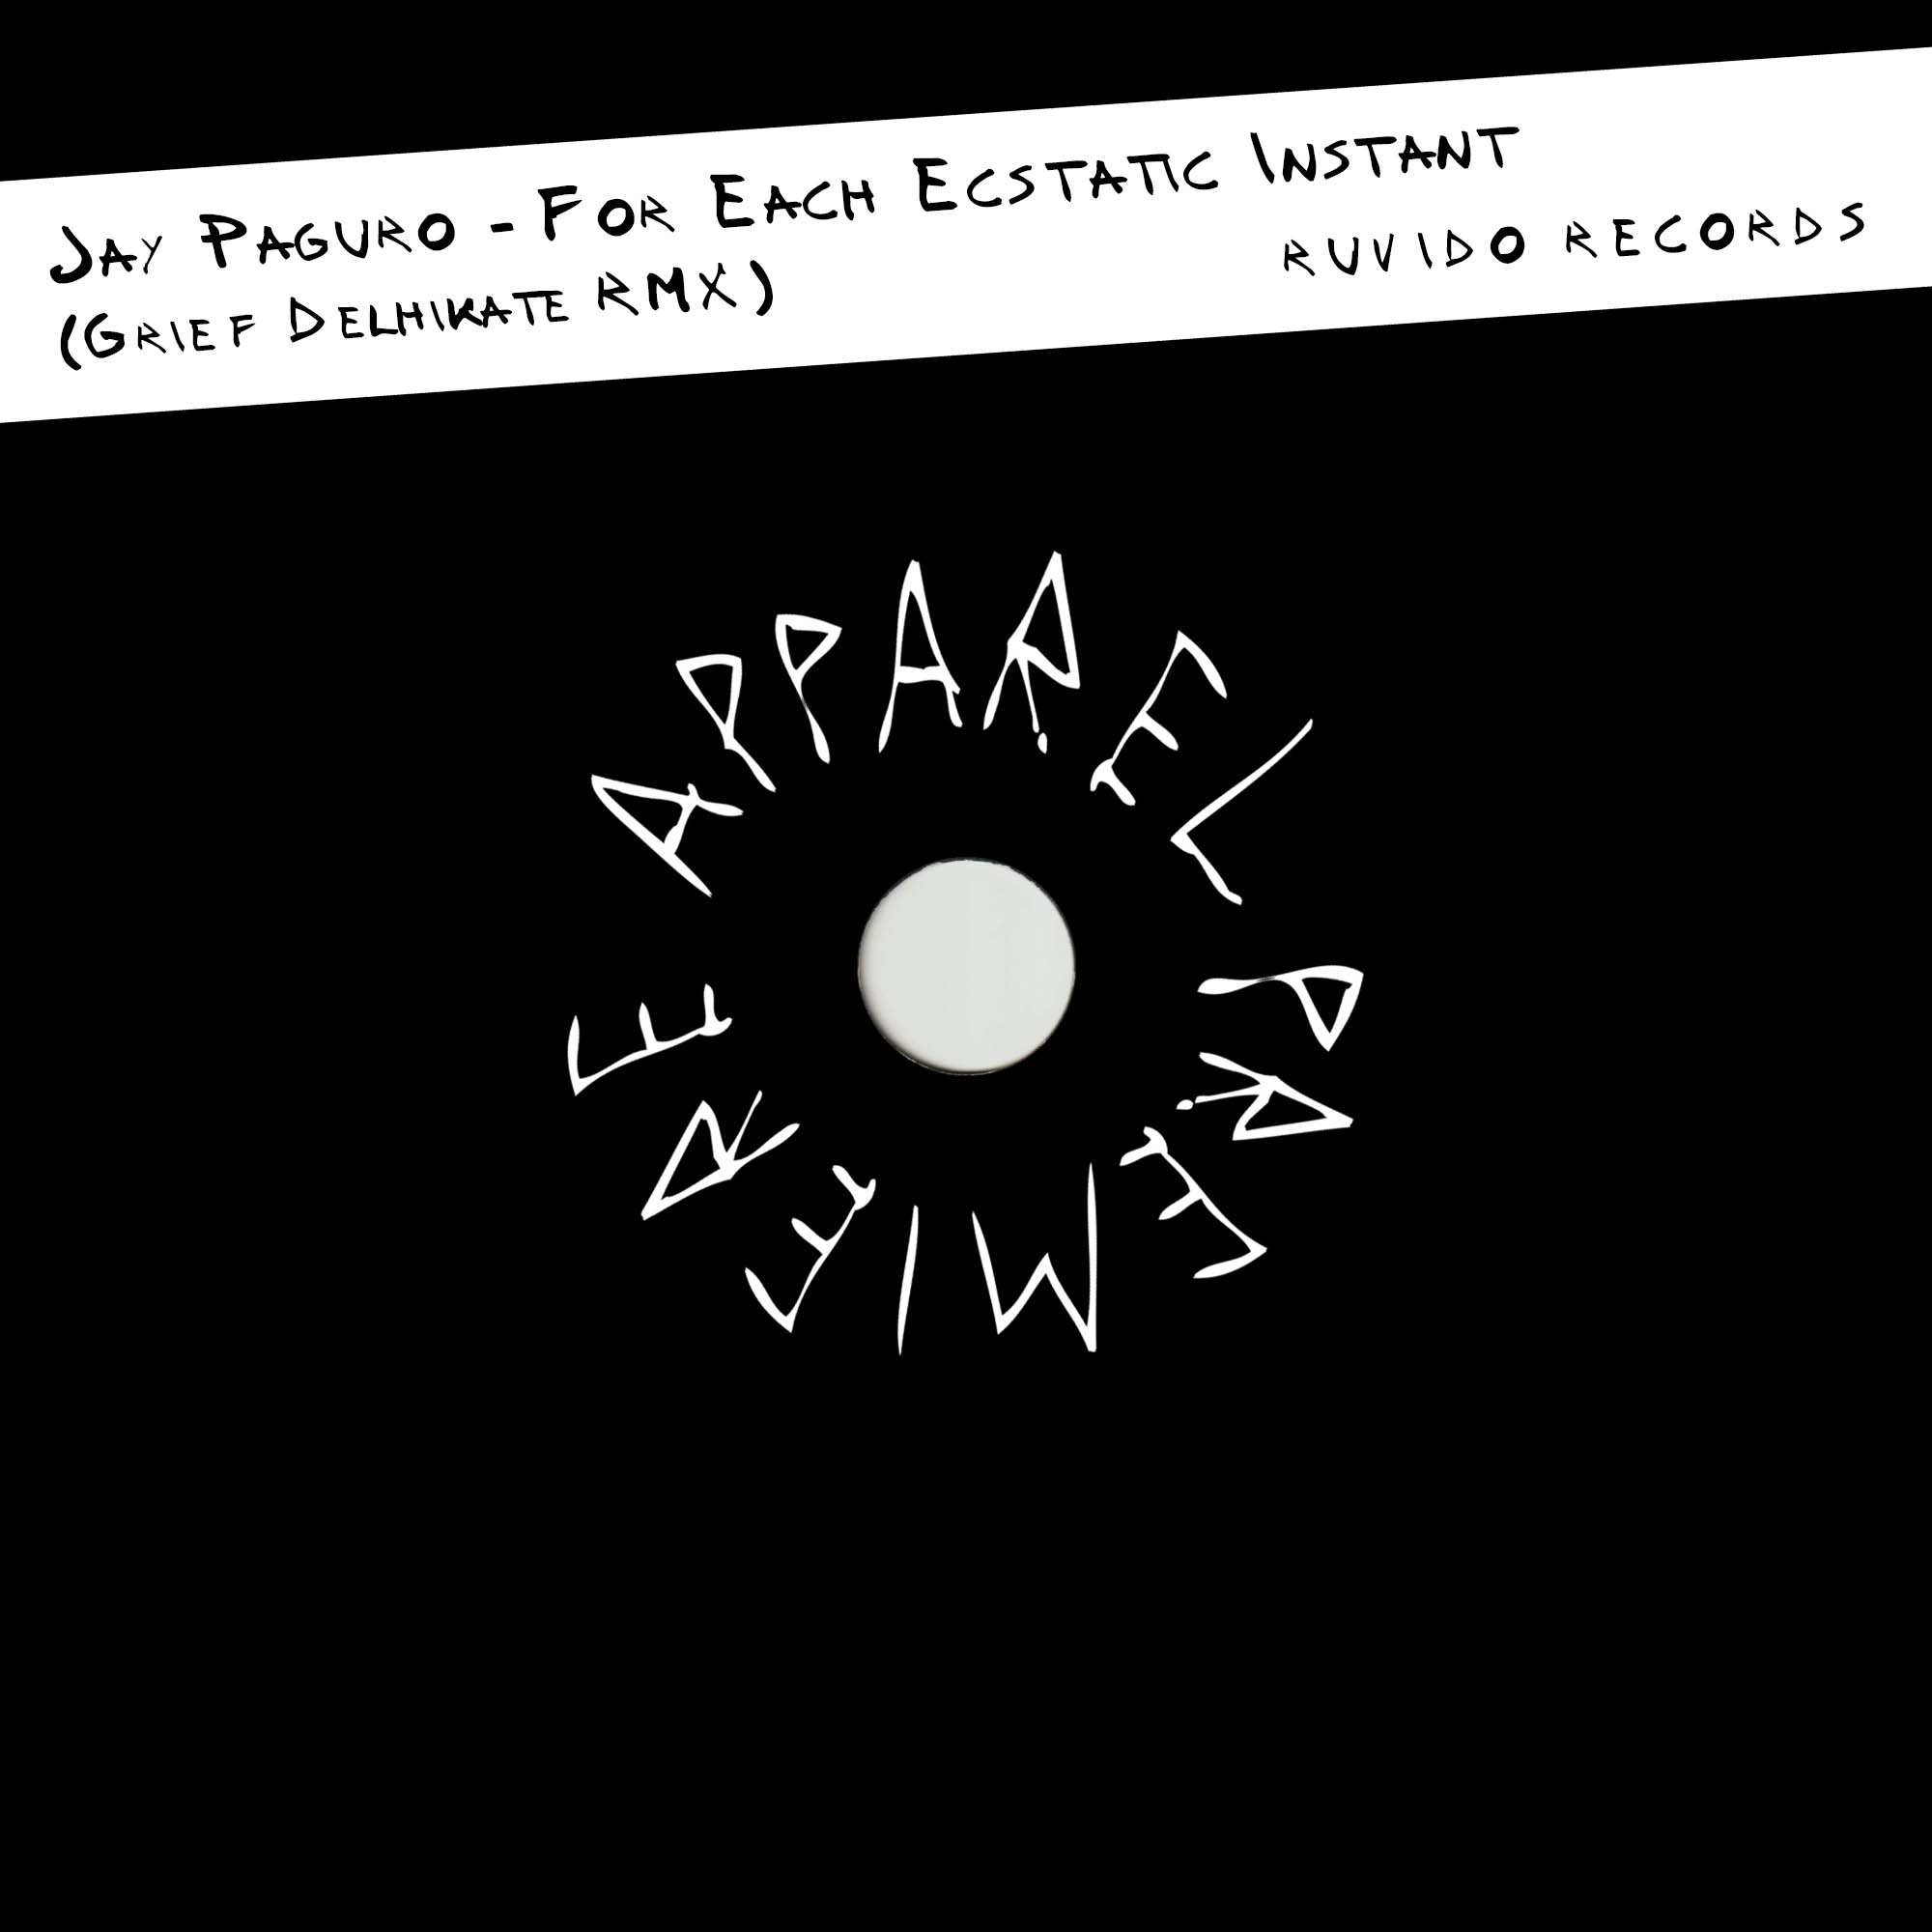 APPAREL PREMIERE Jay Paguro – For Each Ecstatic Instant (Grief Delhikate RMX) [Ruvido Records]